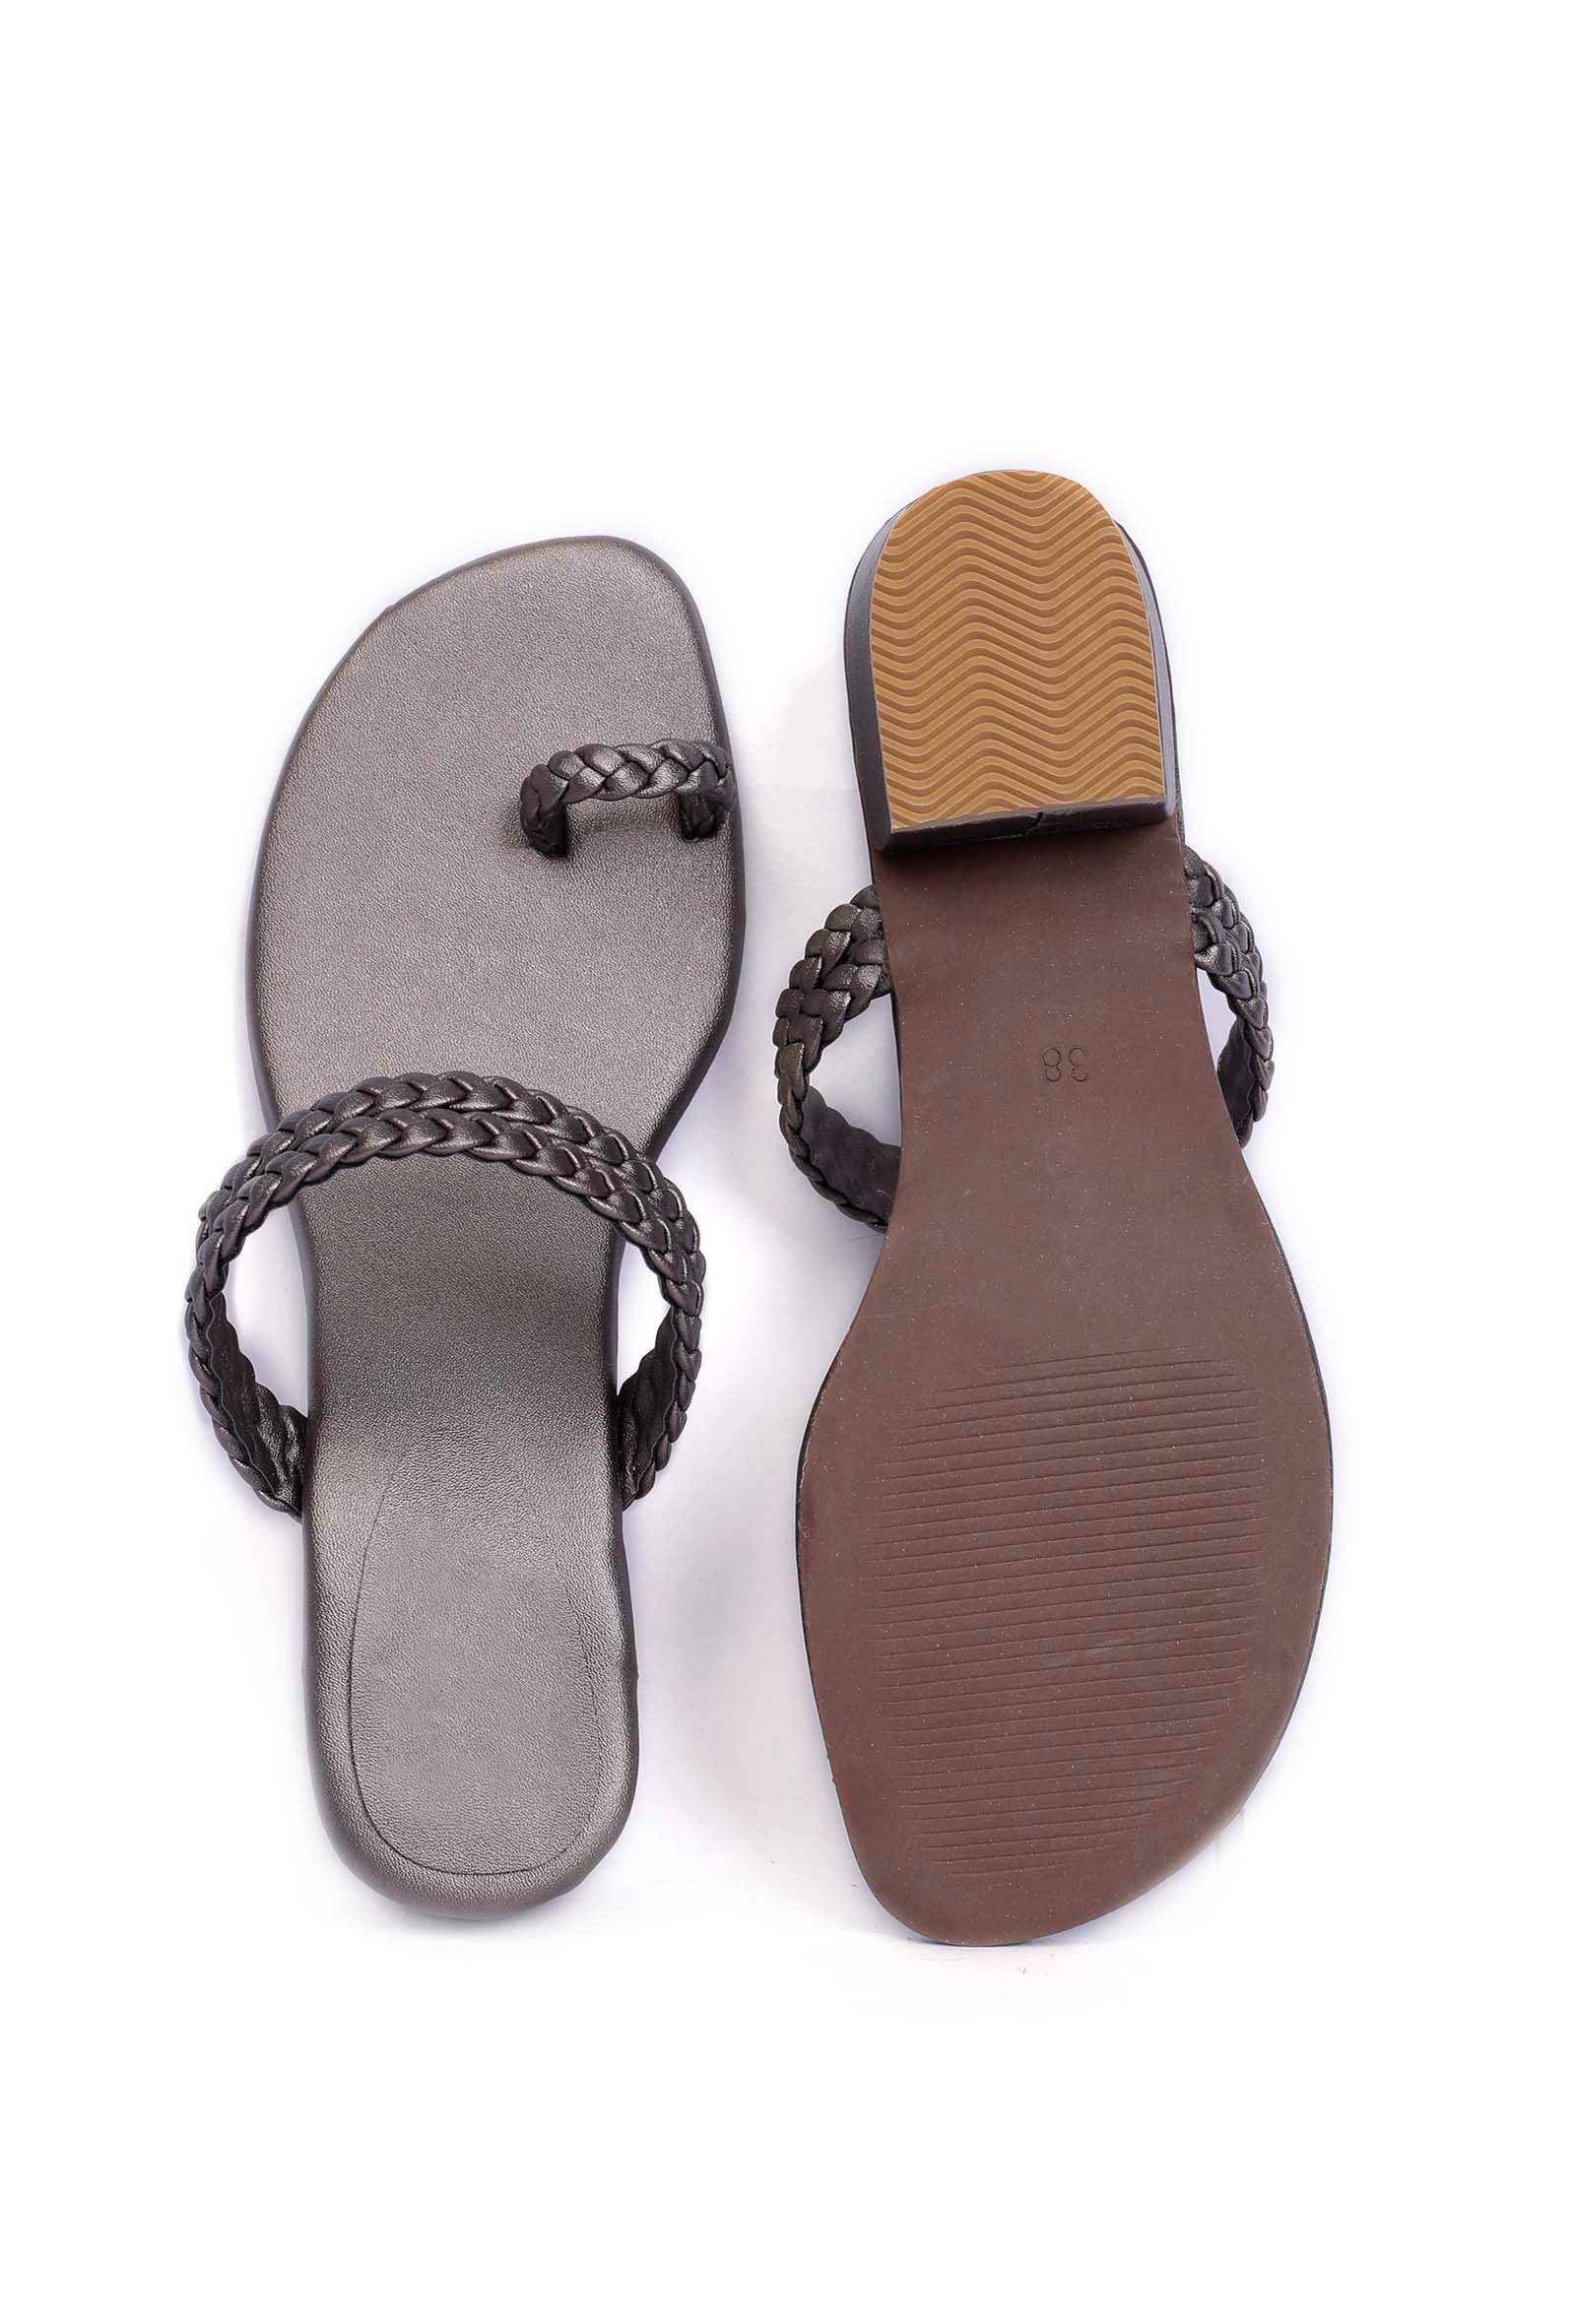 Grey Knotted Cruelty Free Leather Sandals